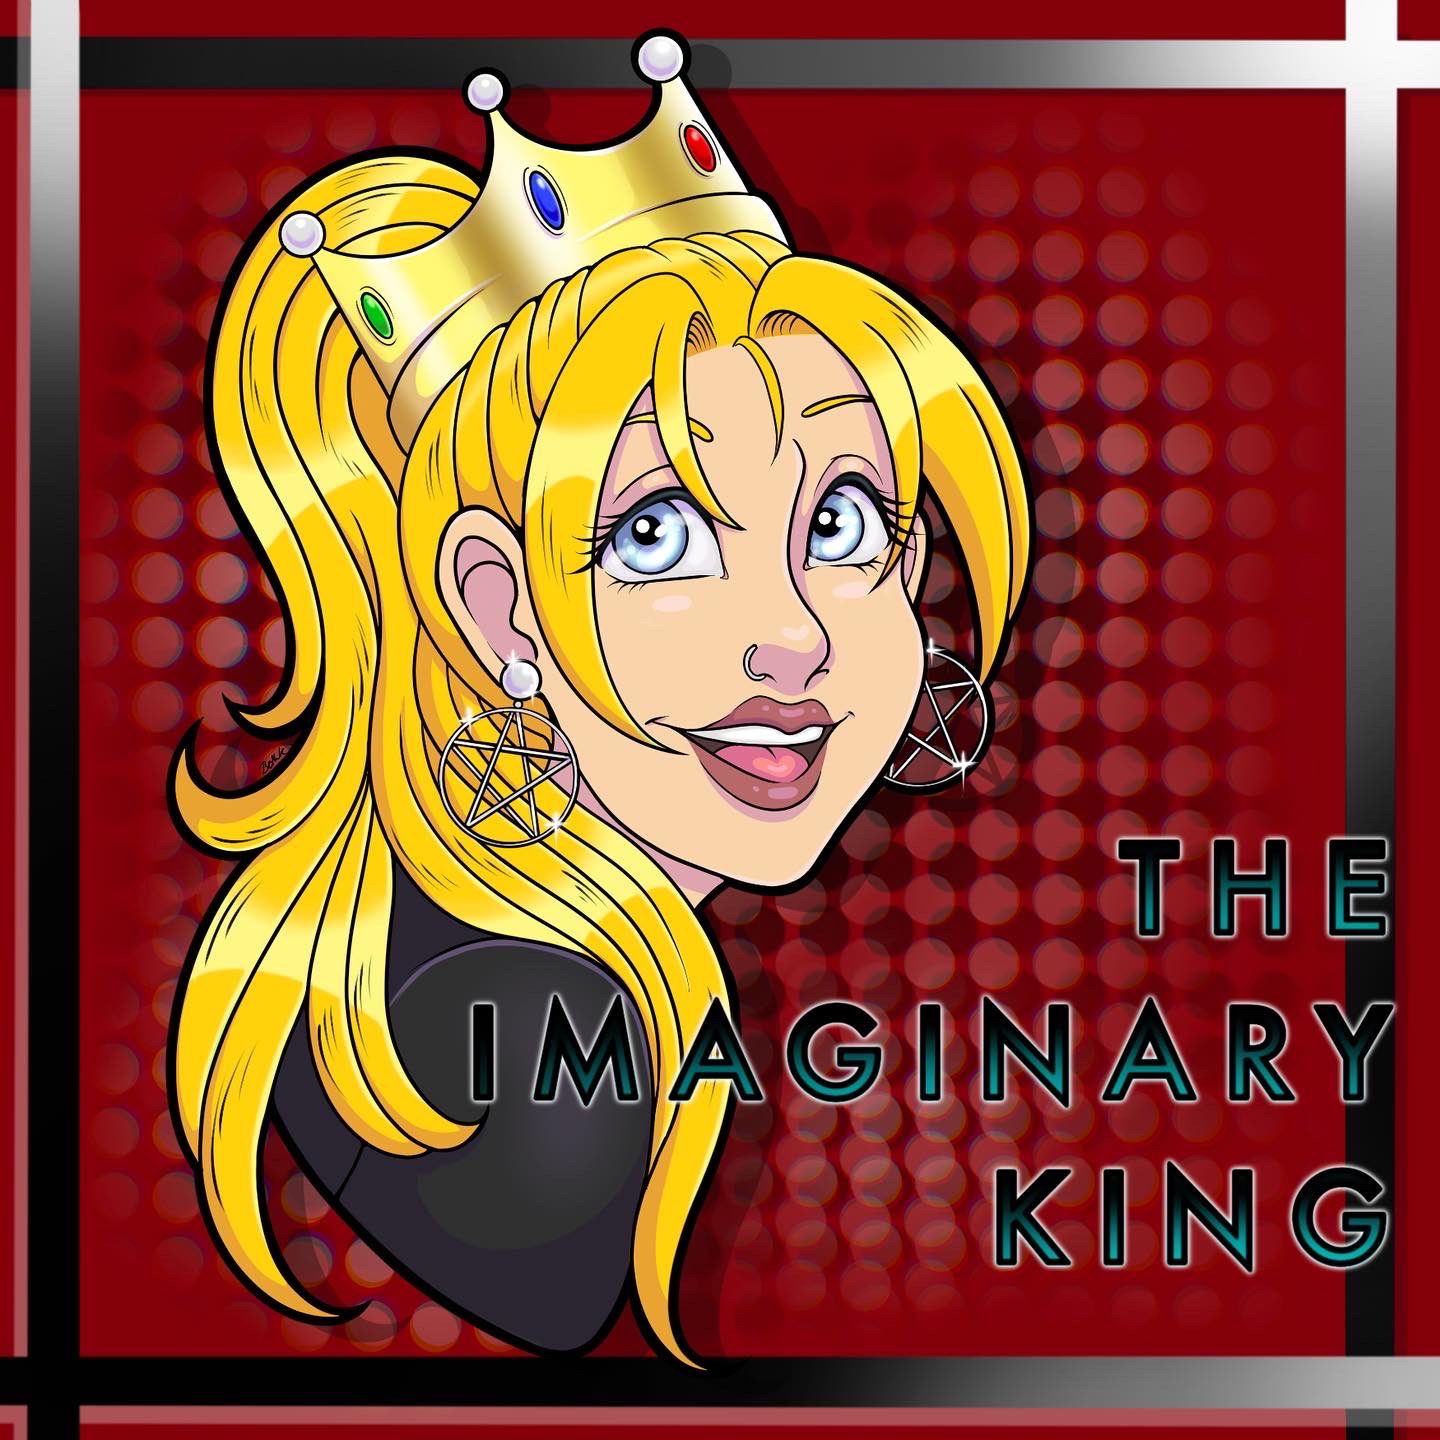 The Imaginary King